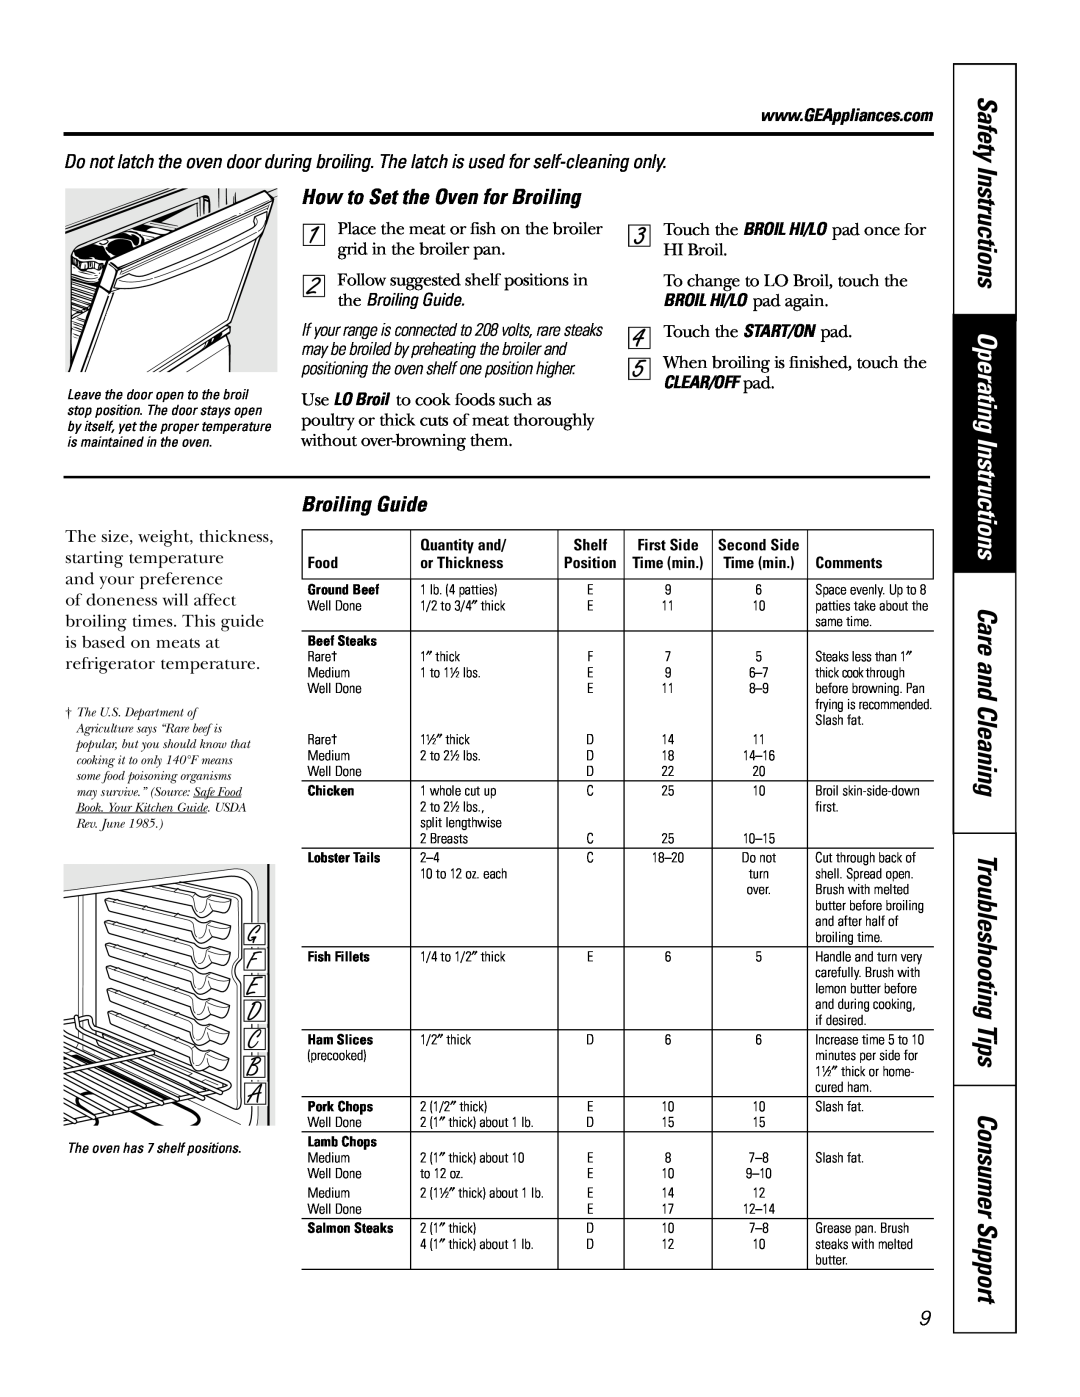 GE JDP39 owner manual Instructions Operating, How to Set the Oven for Broiling, Safety, the Broiling Guide 